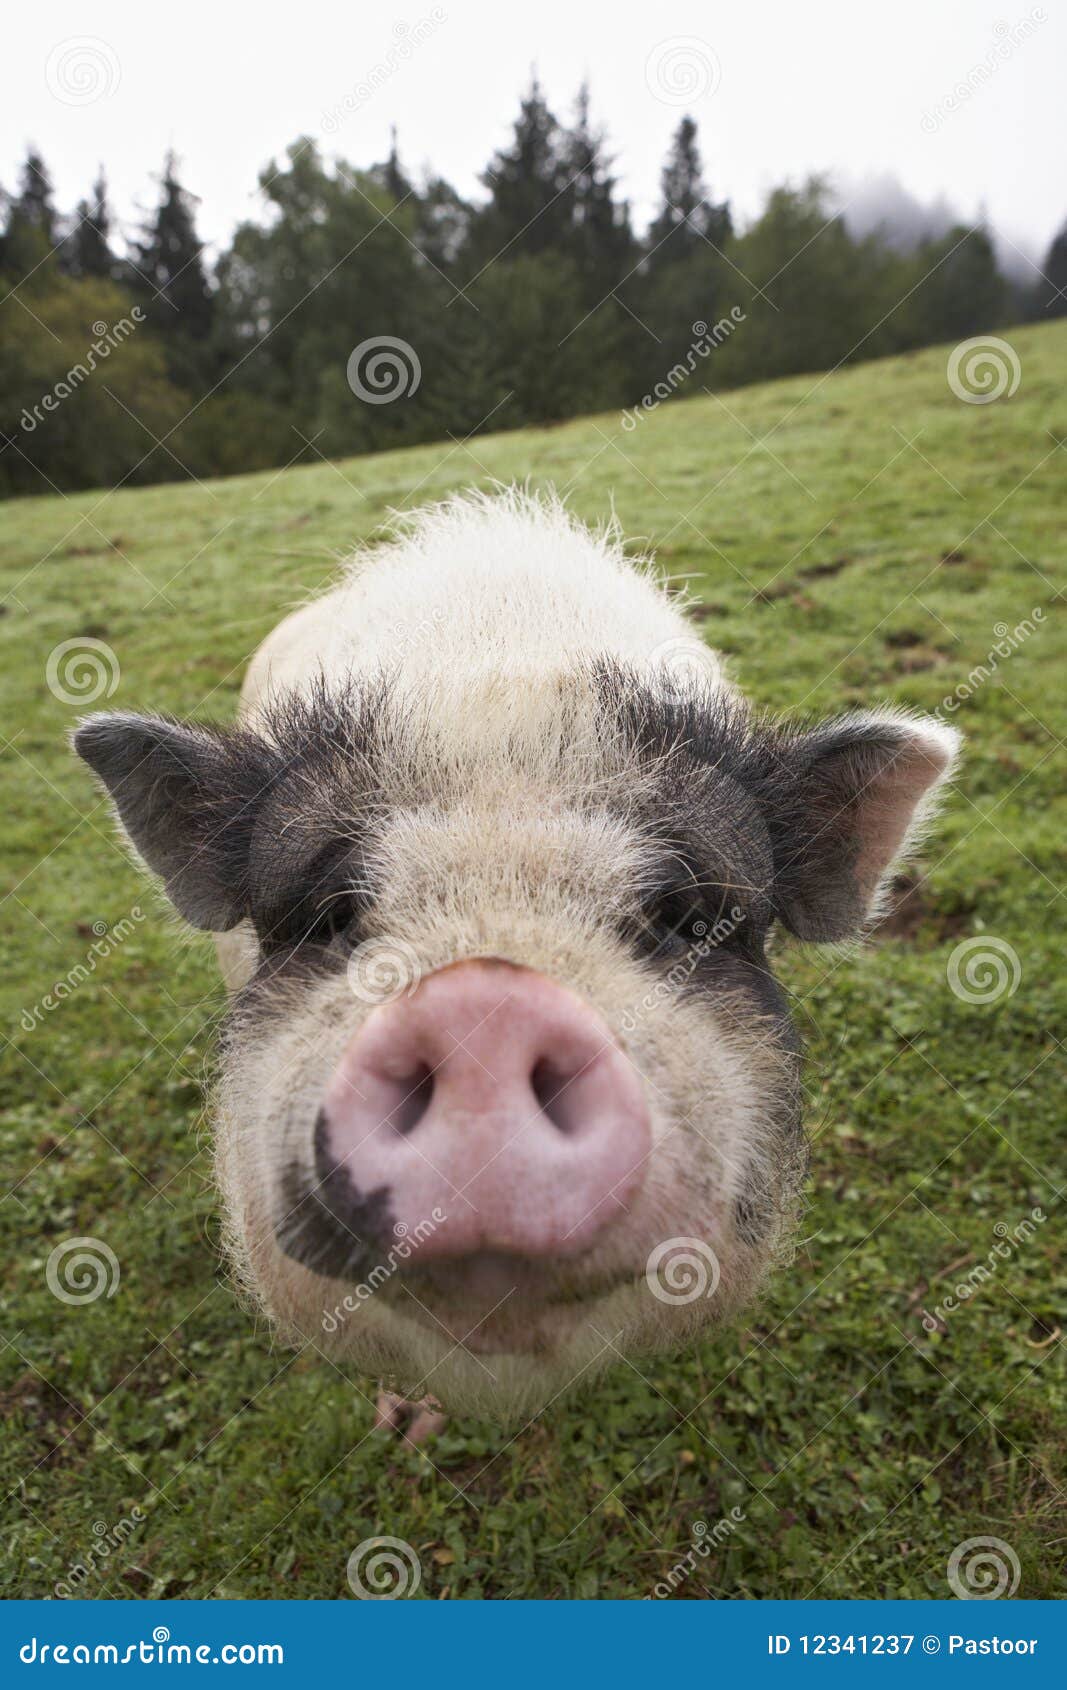 snout of domesticated pig